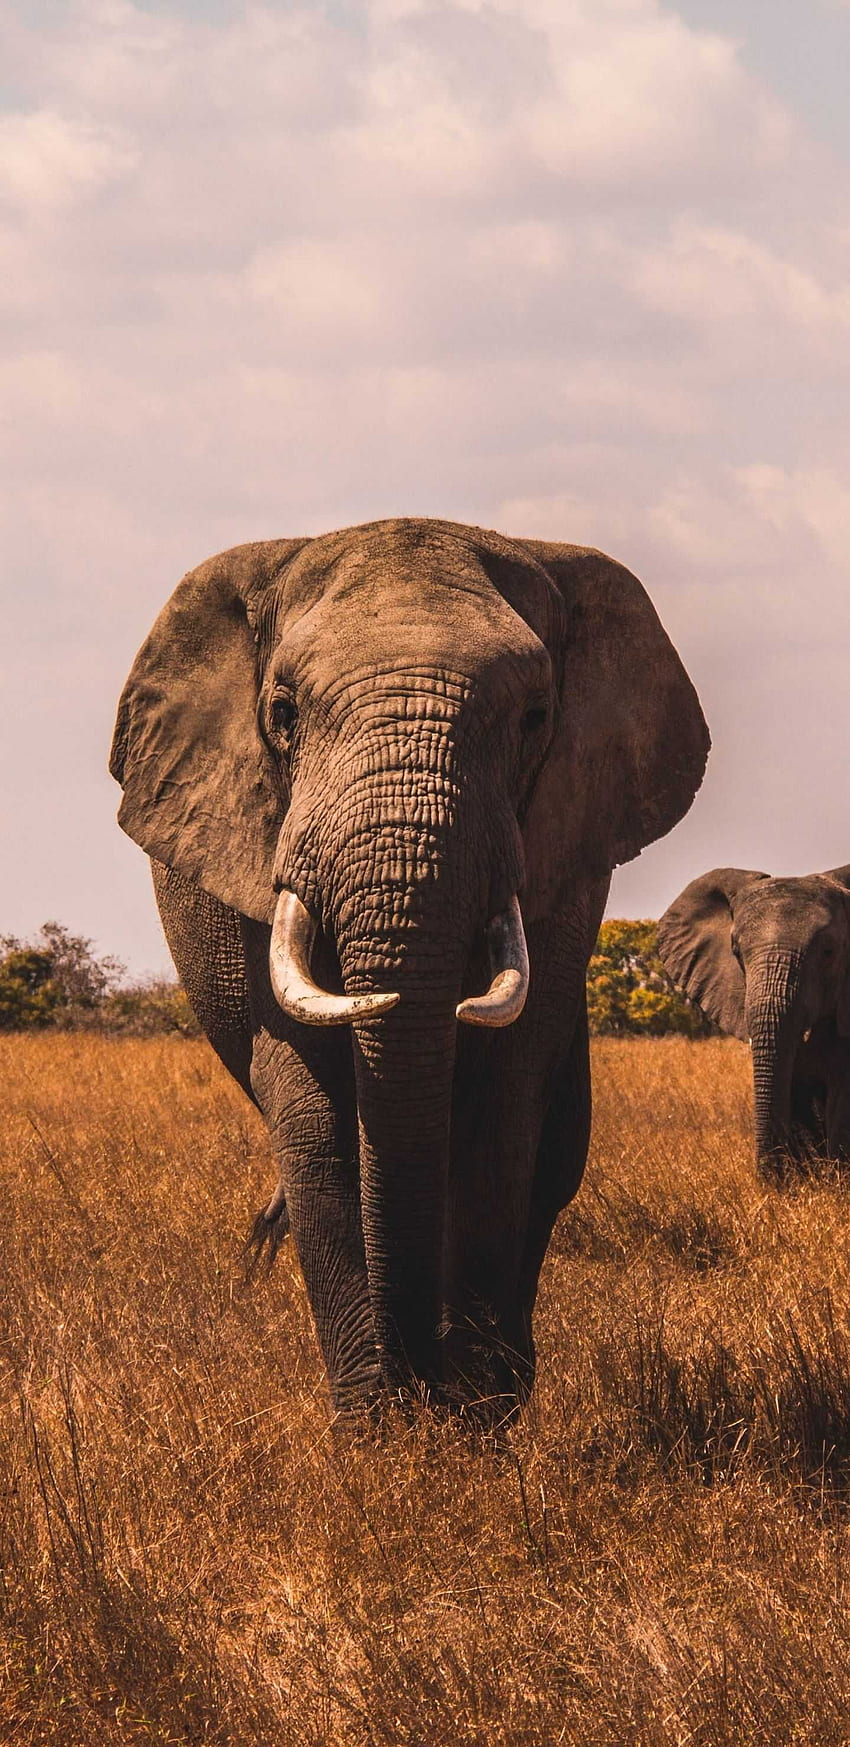 An elephant with tusks stands in a field of tall brown grass. - Elephant